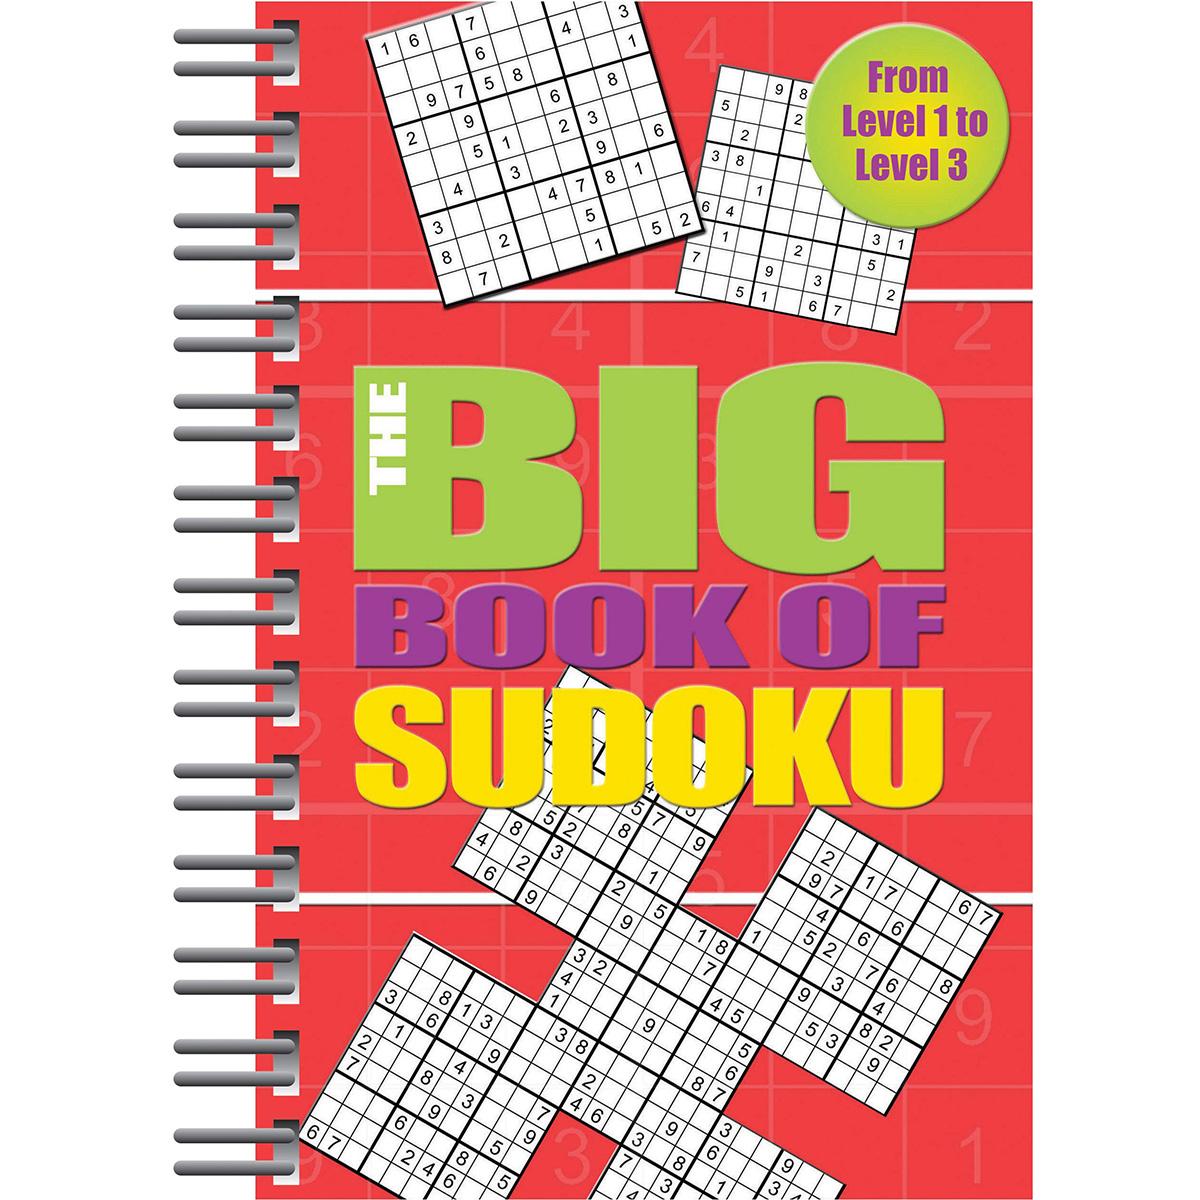 The Big Book of Sudoku Spiral-Bound with 500 Puzzles for $3.42